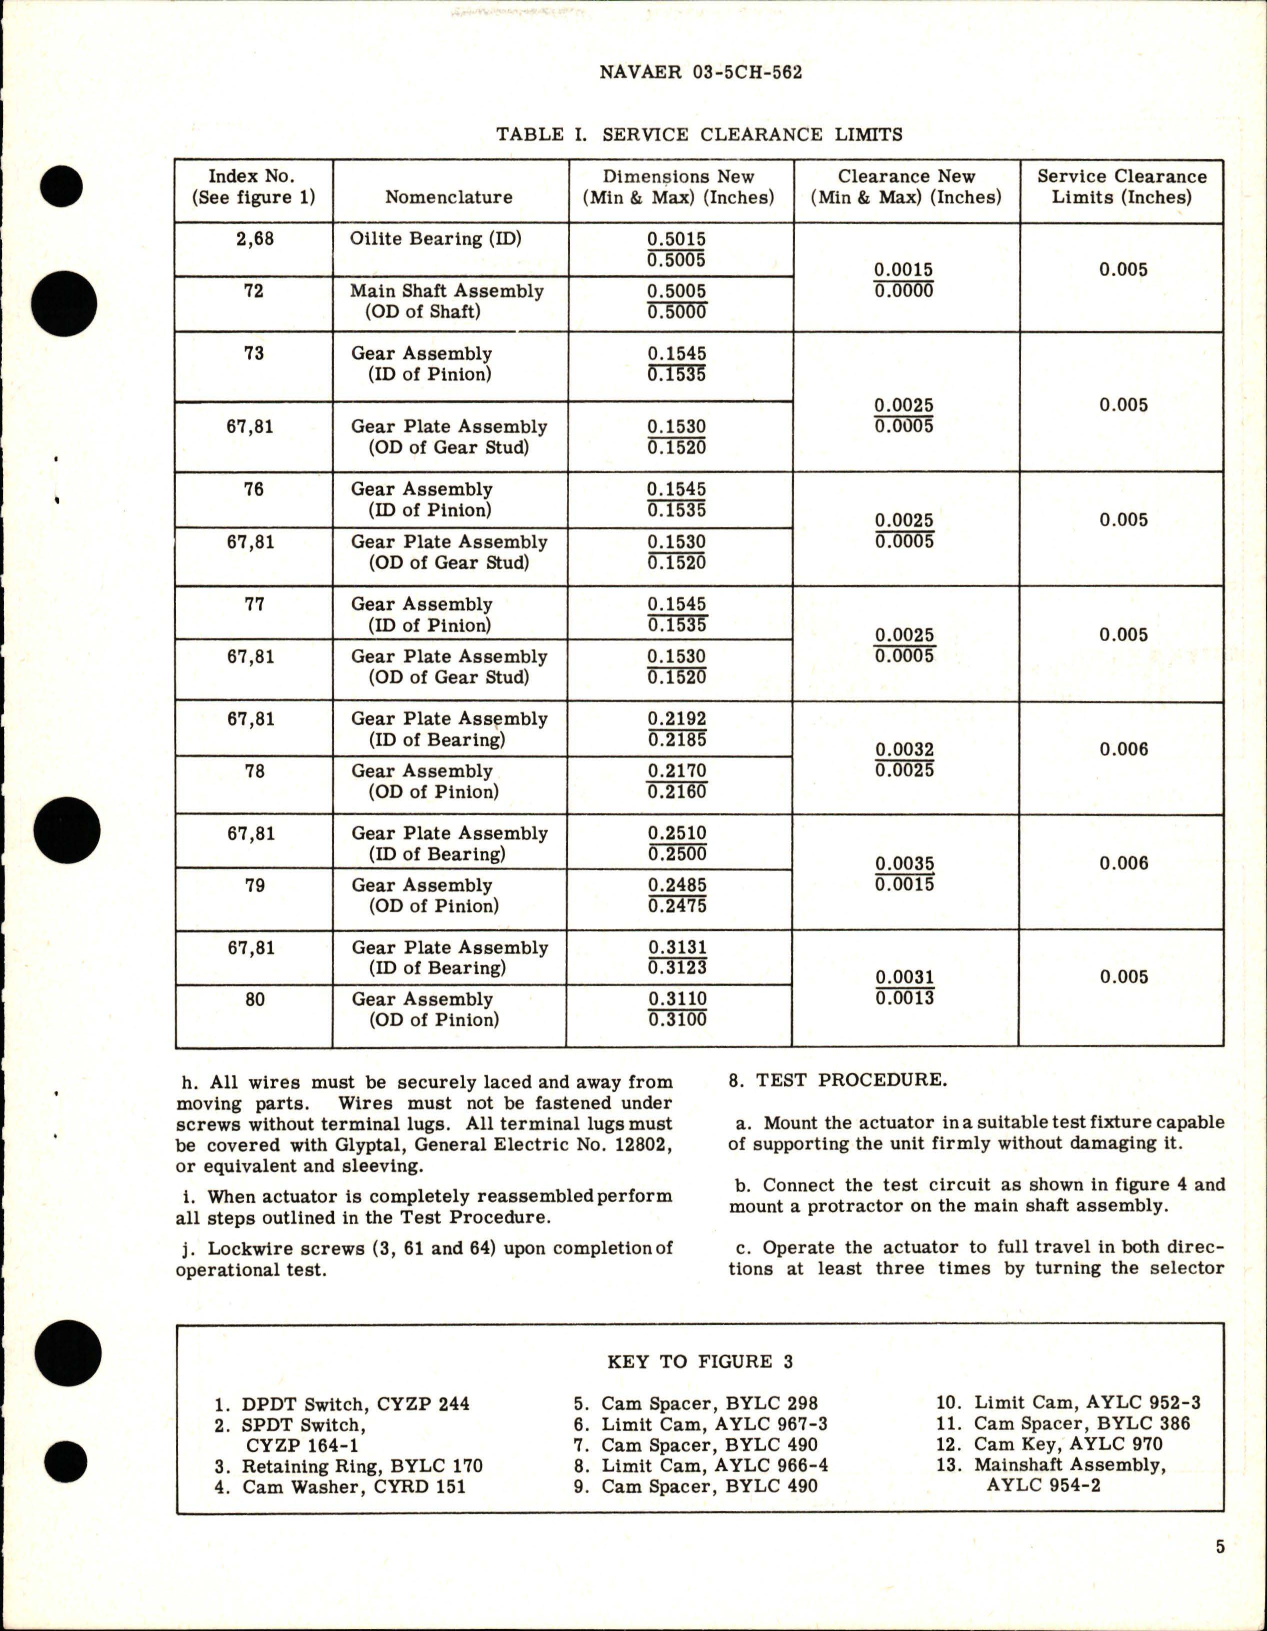 Sample page 5 from AirCorps Library document: Overhaul Instructions with Parts Breakdown for Rotary Actuator - AYLC 4424